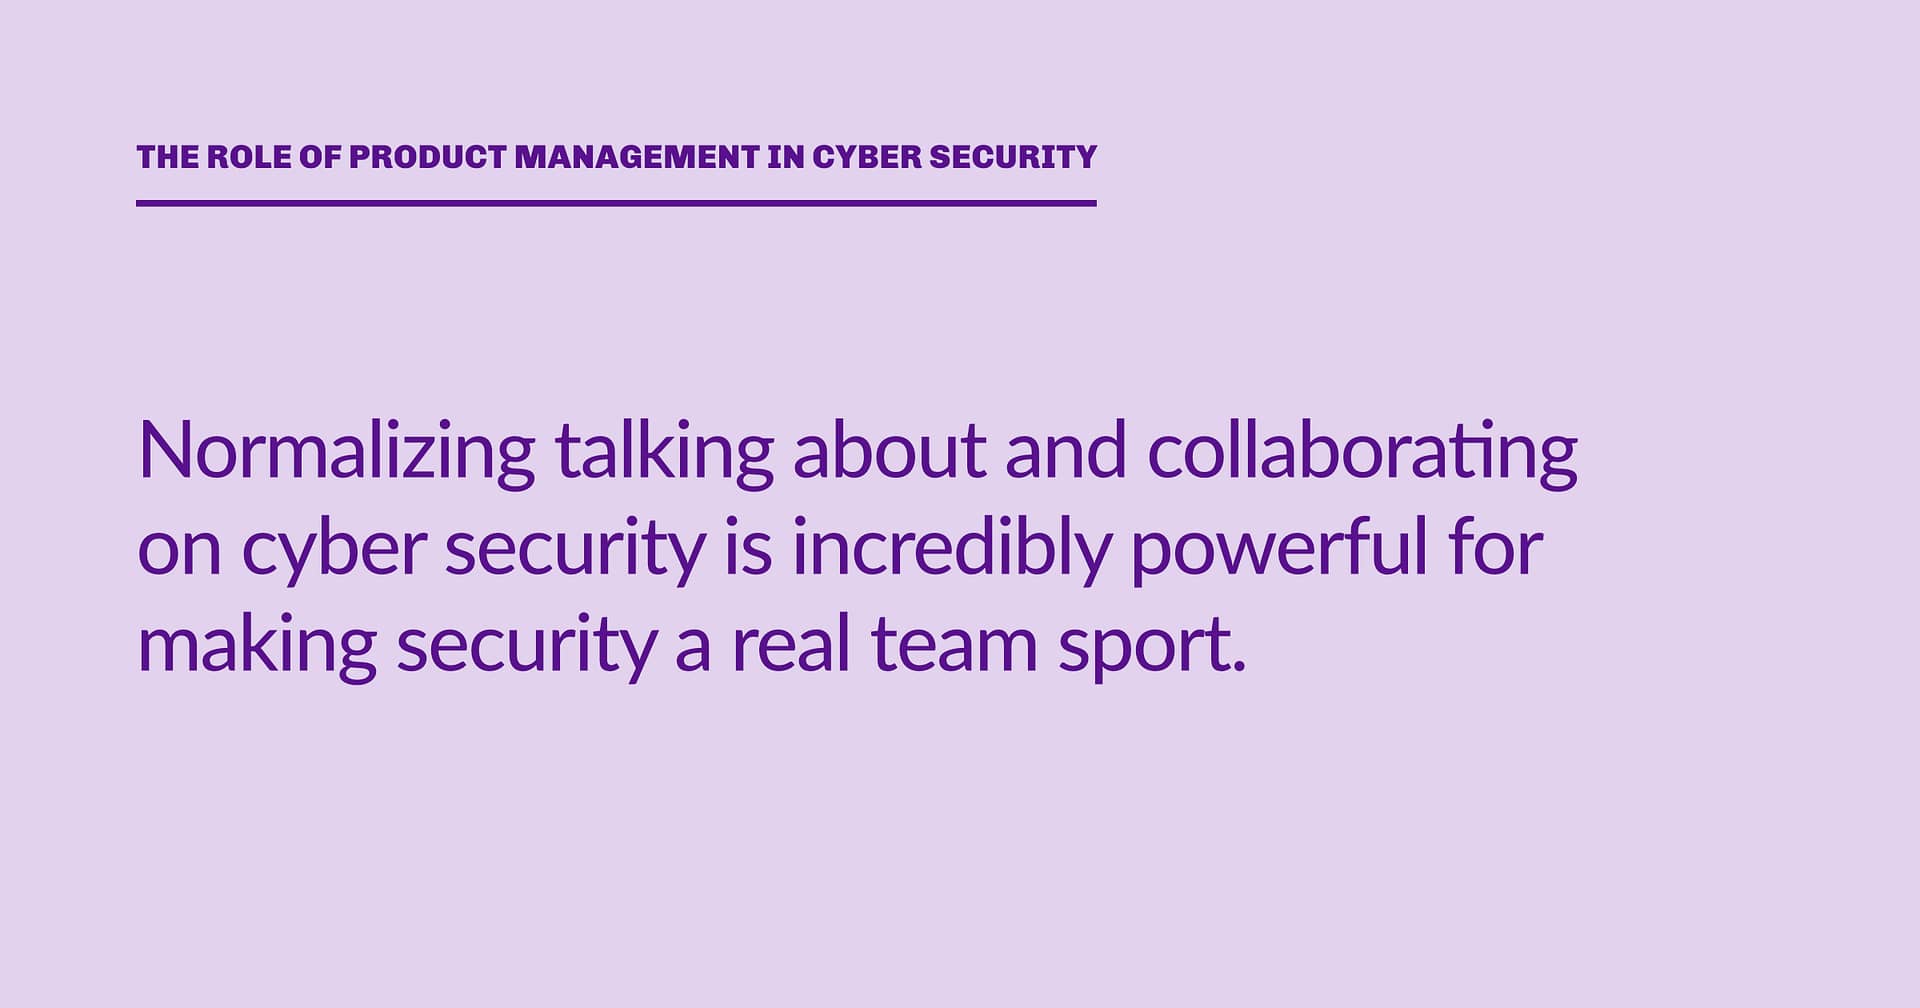 Highlight block: Normalizing talking about and collaborating on cyber security is incredibly powerful for making security a real team sport.